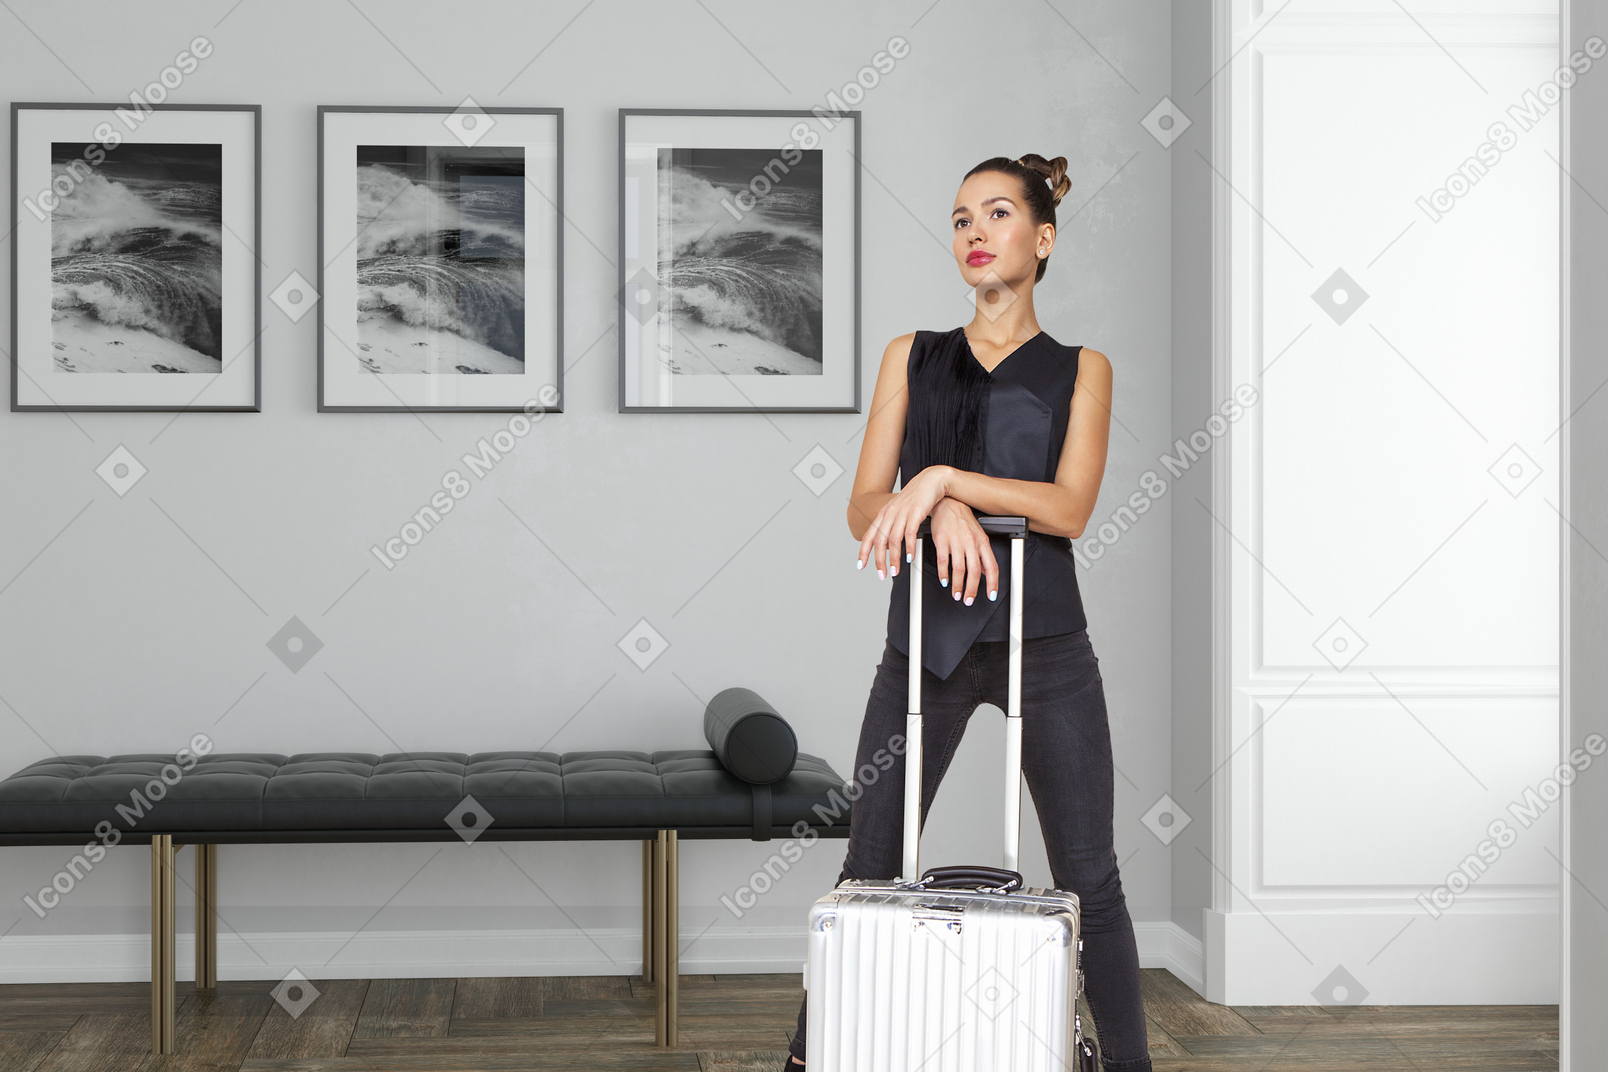 A woman standing with a suitcase in a room